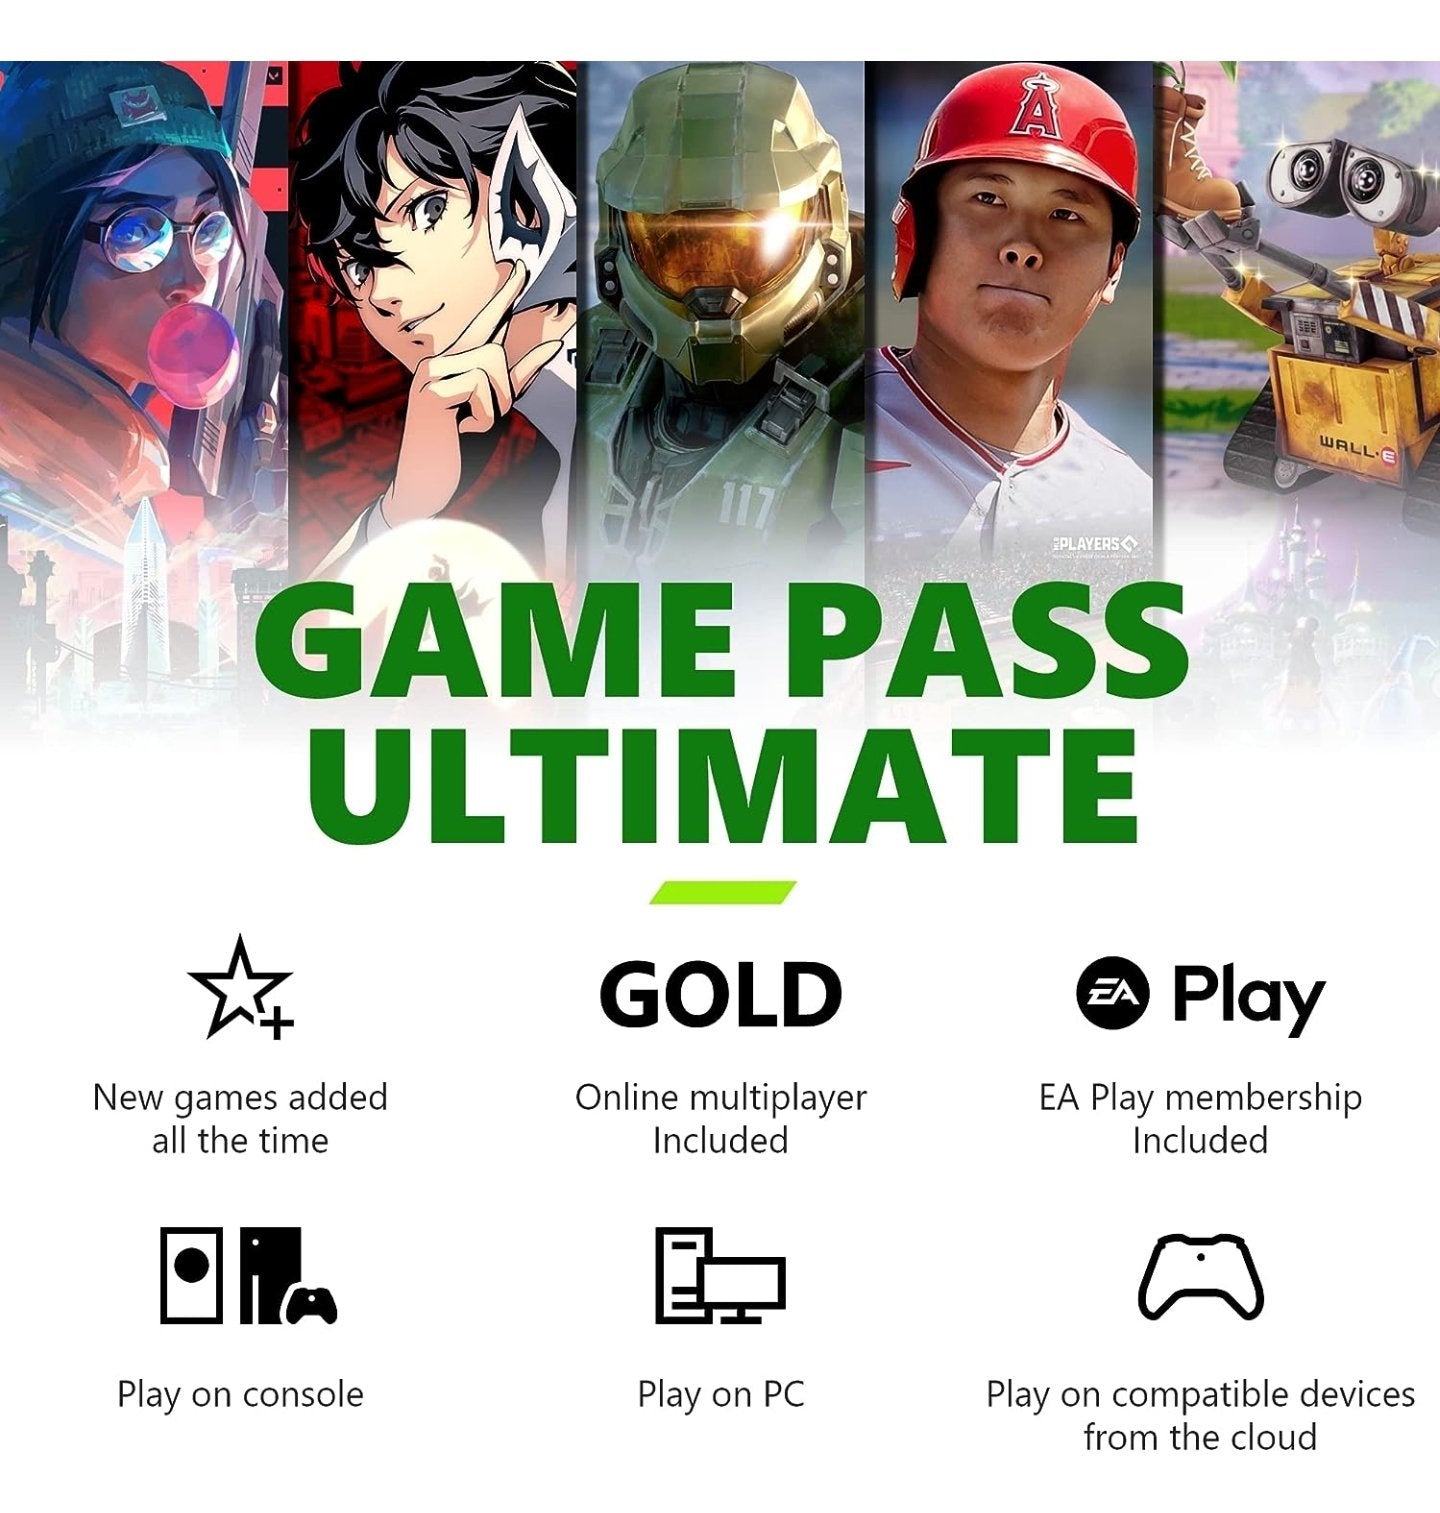 XBOX GAME PASS ULTIMATE 3 MES